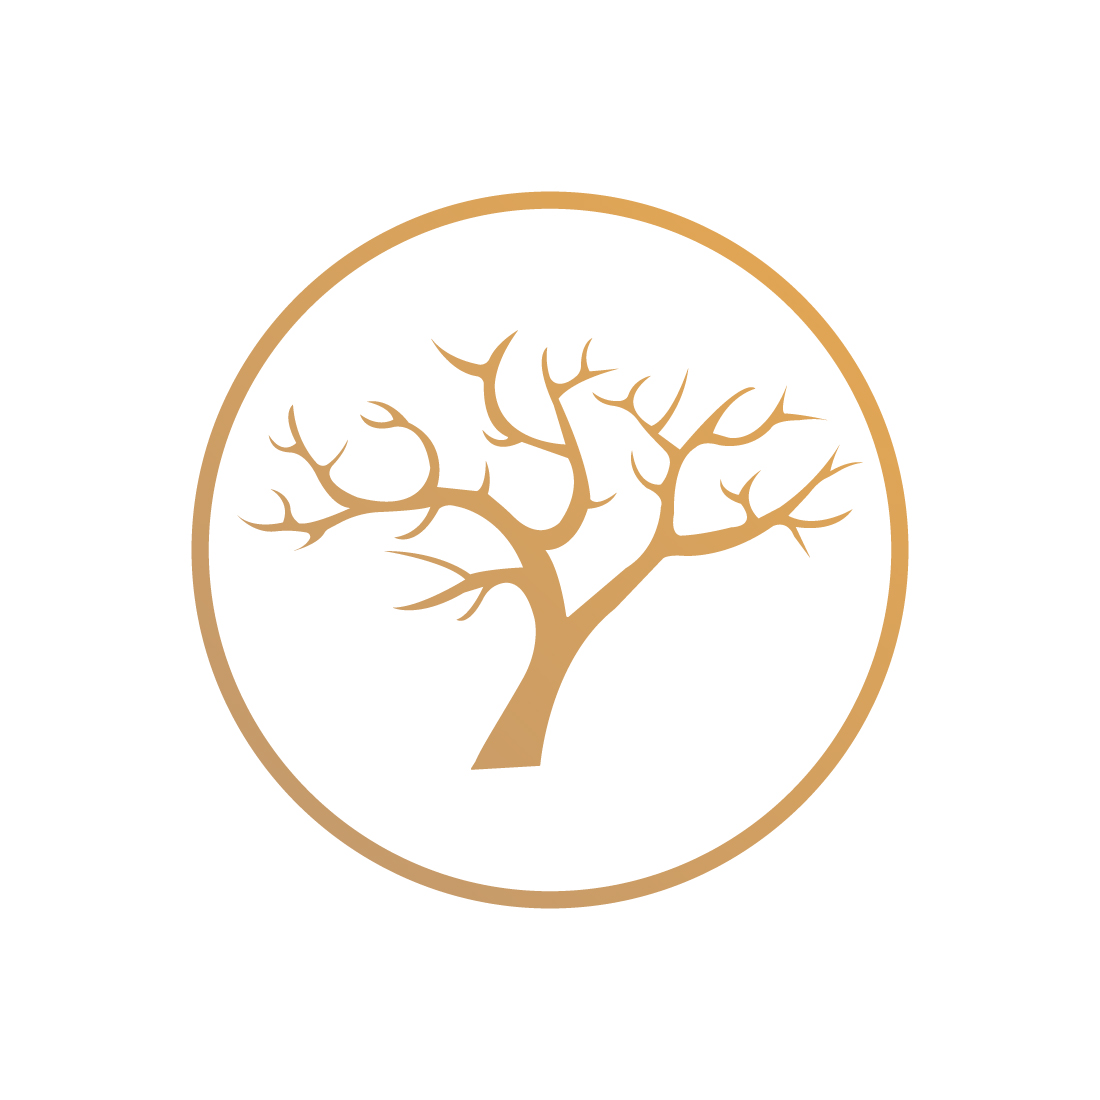 Dry tree logo design vector images Dead Trees logo design Template royalty Cracked wood tree circle images preview image.